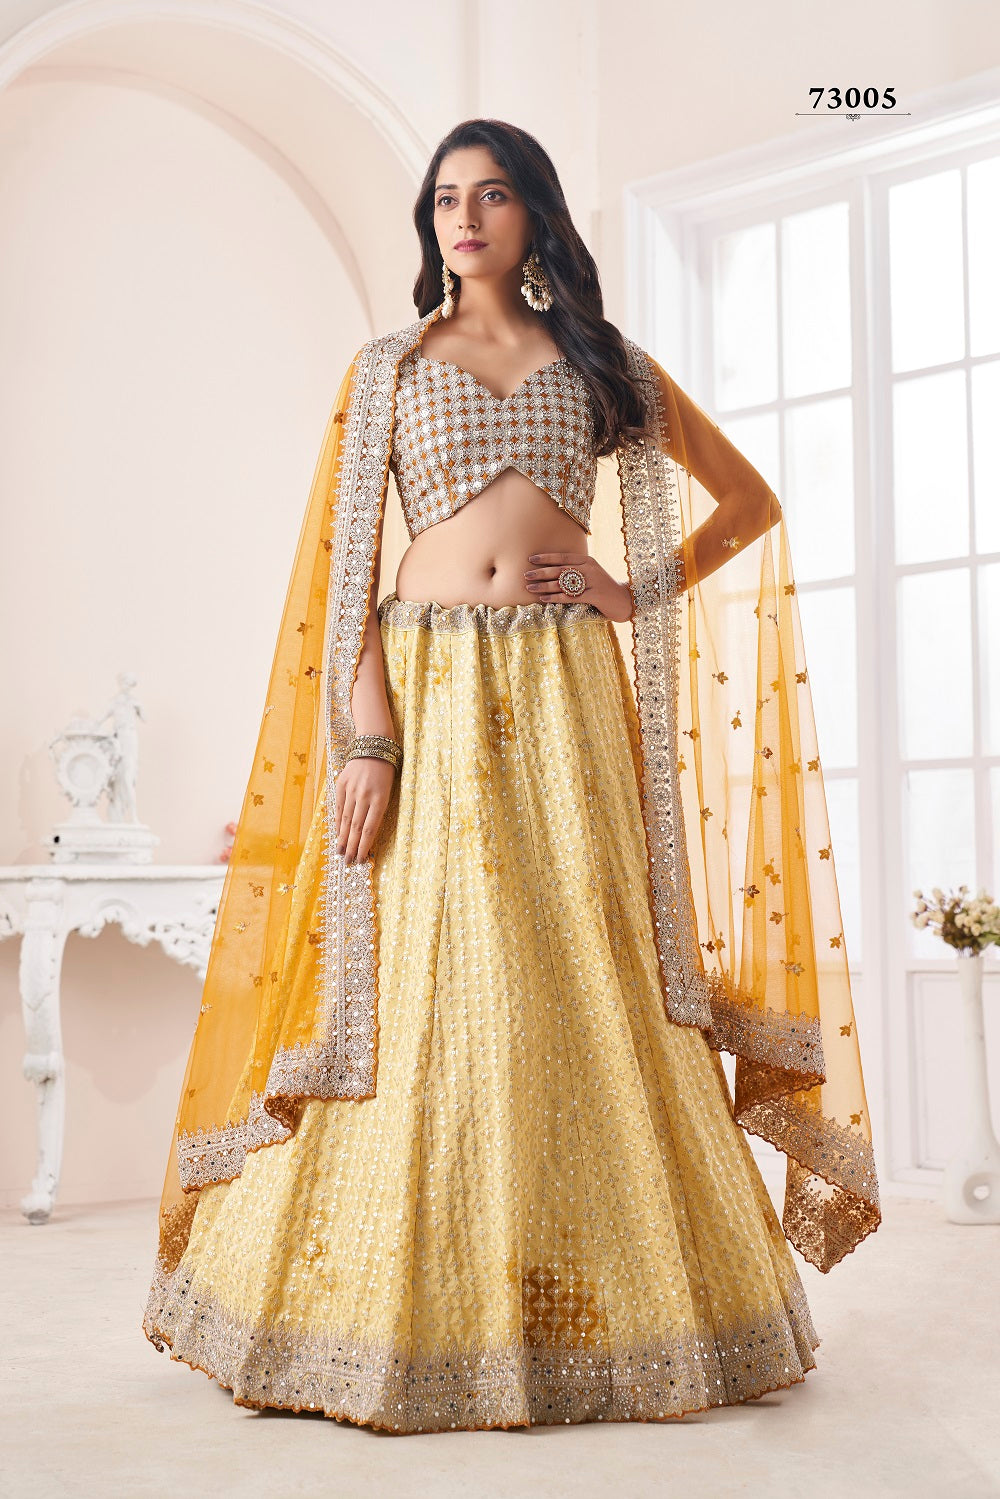 Bridal lehenga paired with brown color heavily embellished choli and two  net dupattas with heavy embroidered border in peach and maroon color  |lovelyweddingmall.com|